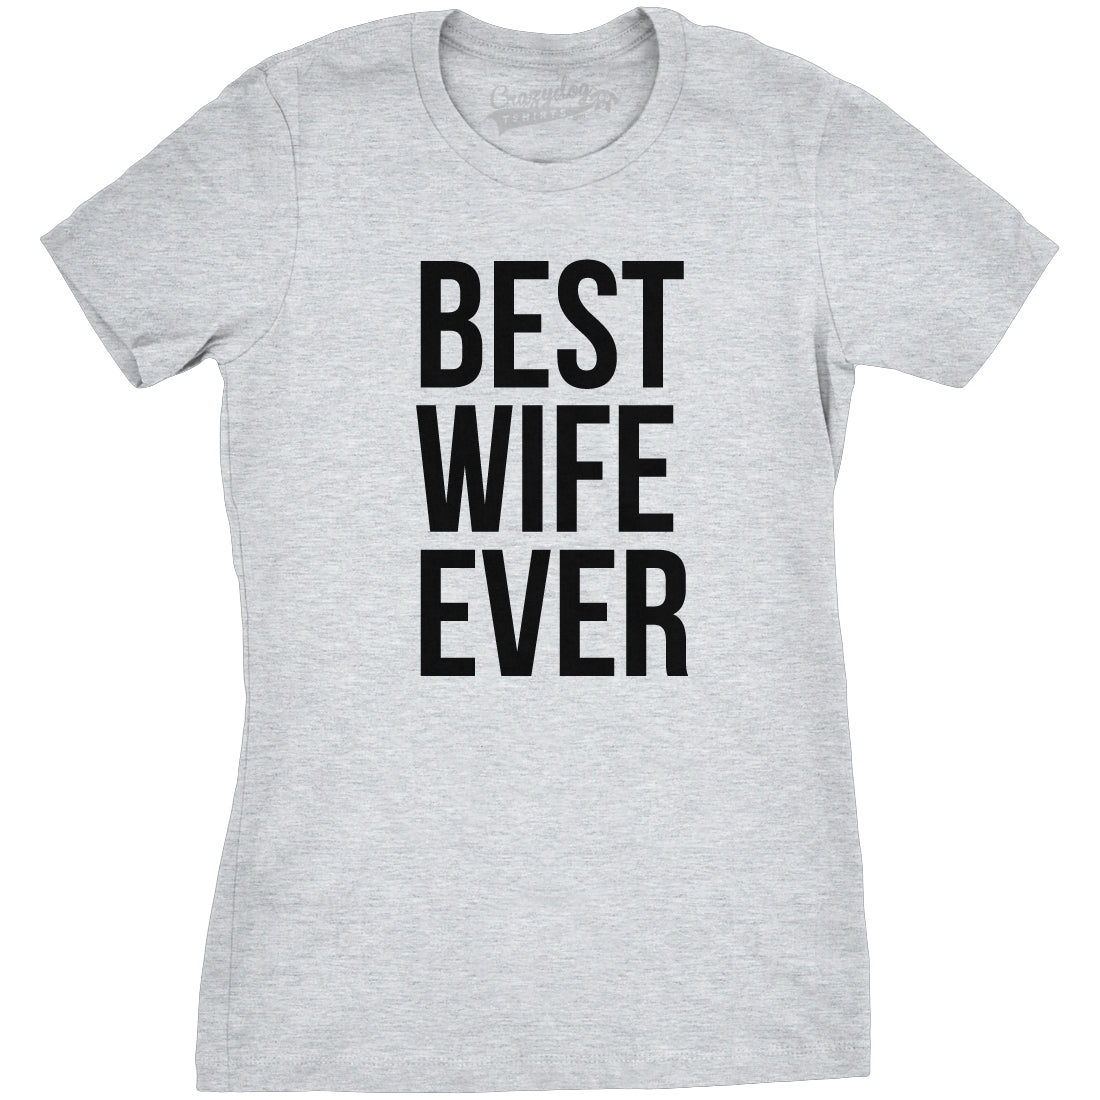 Funny Light Heather Grey Best Wife Ever Womens T Shirt Nerdy Valentine&#39;s Day Mother&#39;s Day Tee